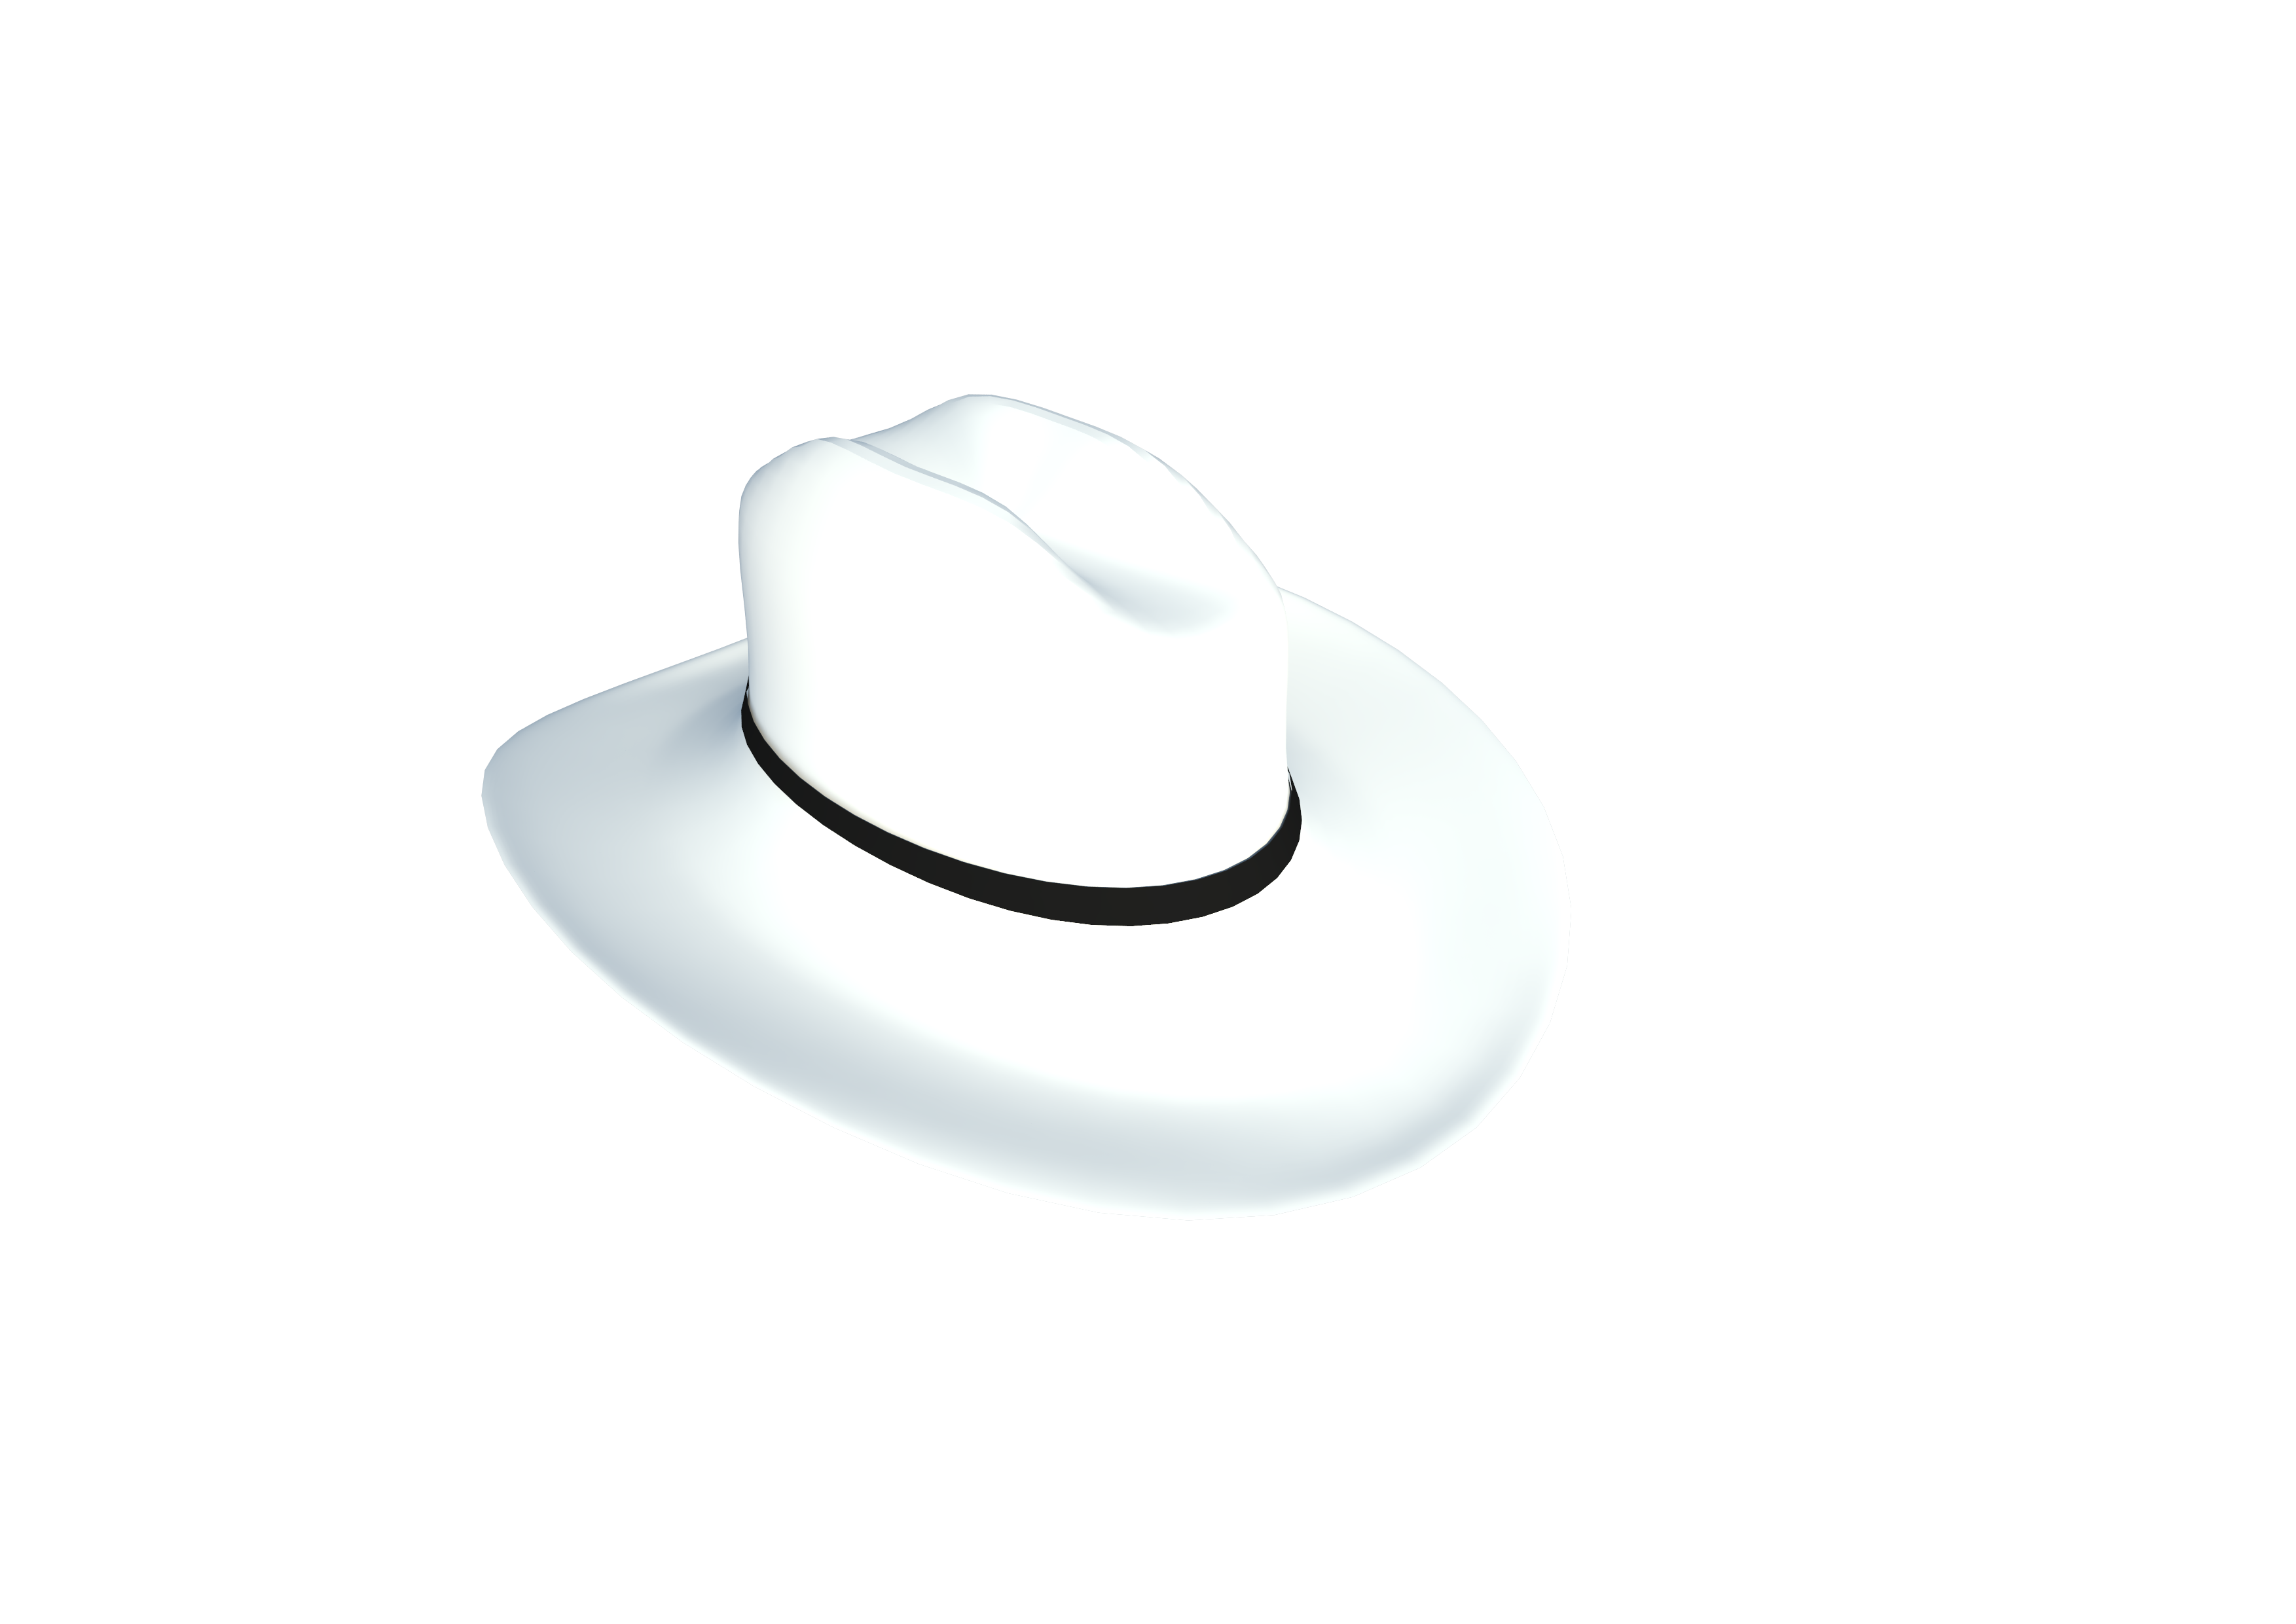 This invention is a cowboy hat with a pocket on the inside that is concealed between the head and the hat when it is worn.